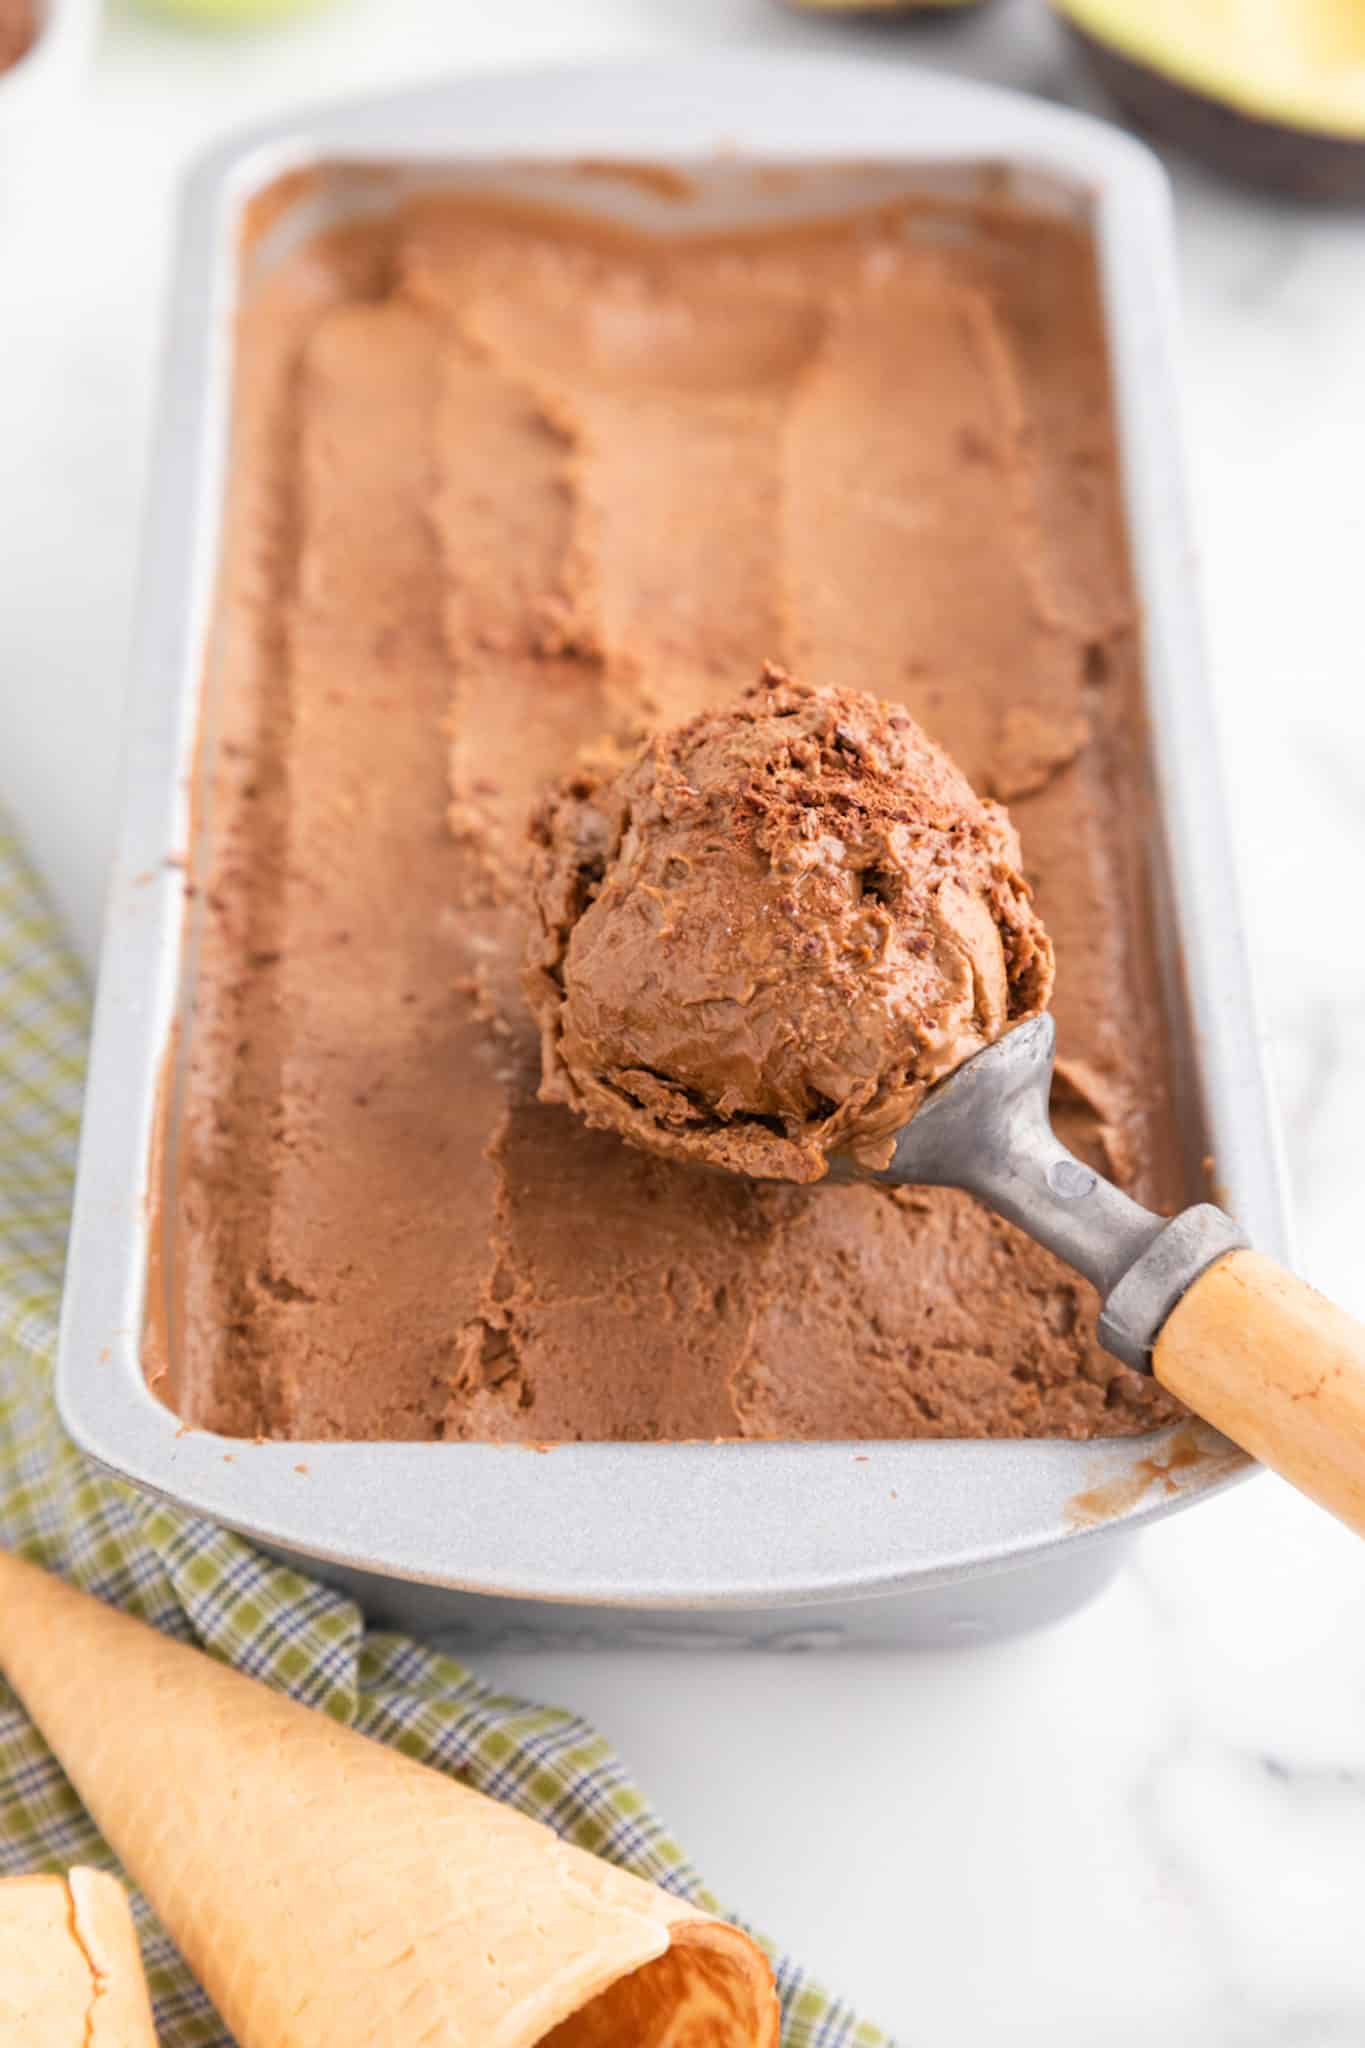 An ice cream scoop filled with chocolate avocado ice cream from a metal loaf pan.